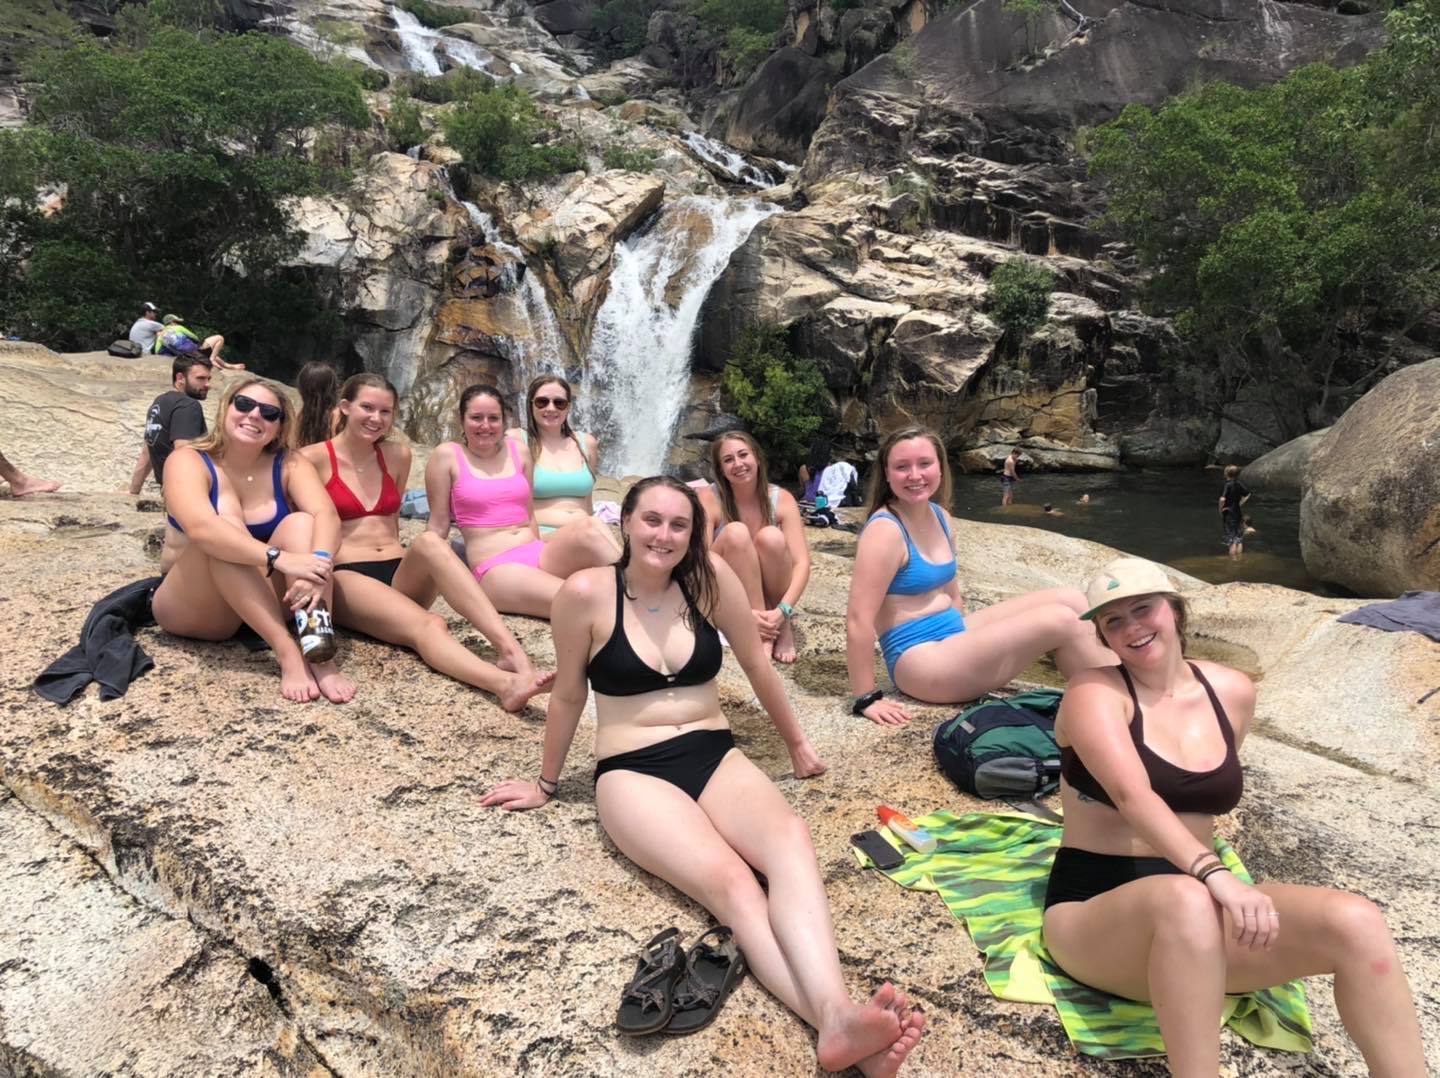 Christina and a group of friends sunbathing by the waterfall